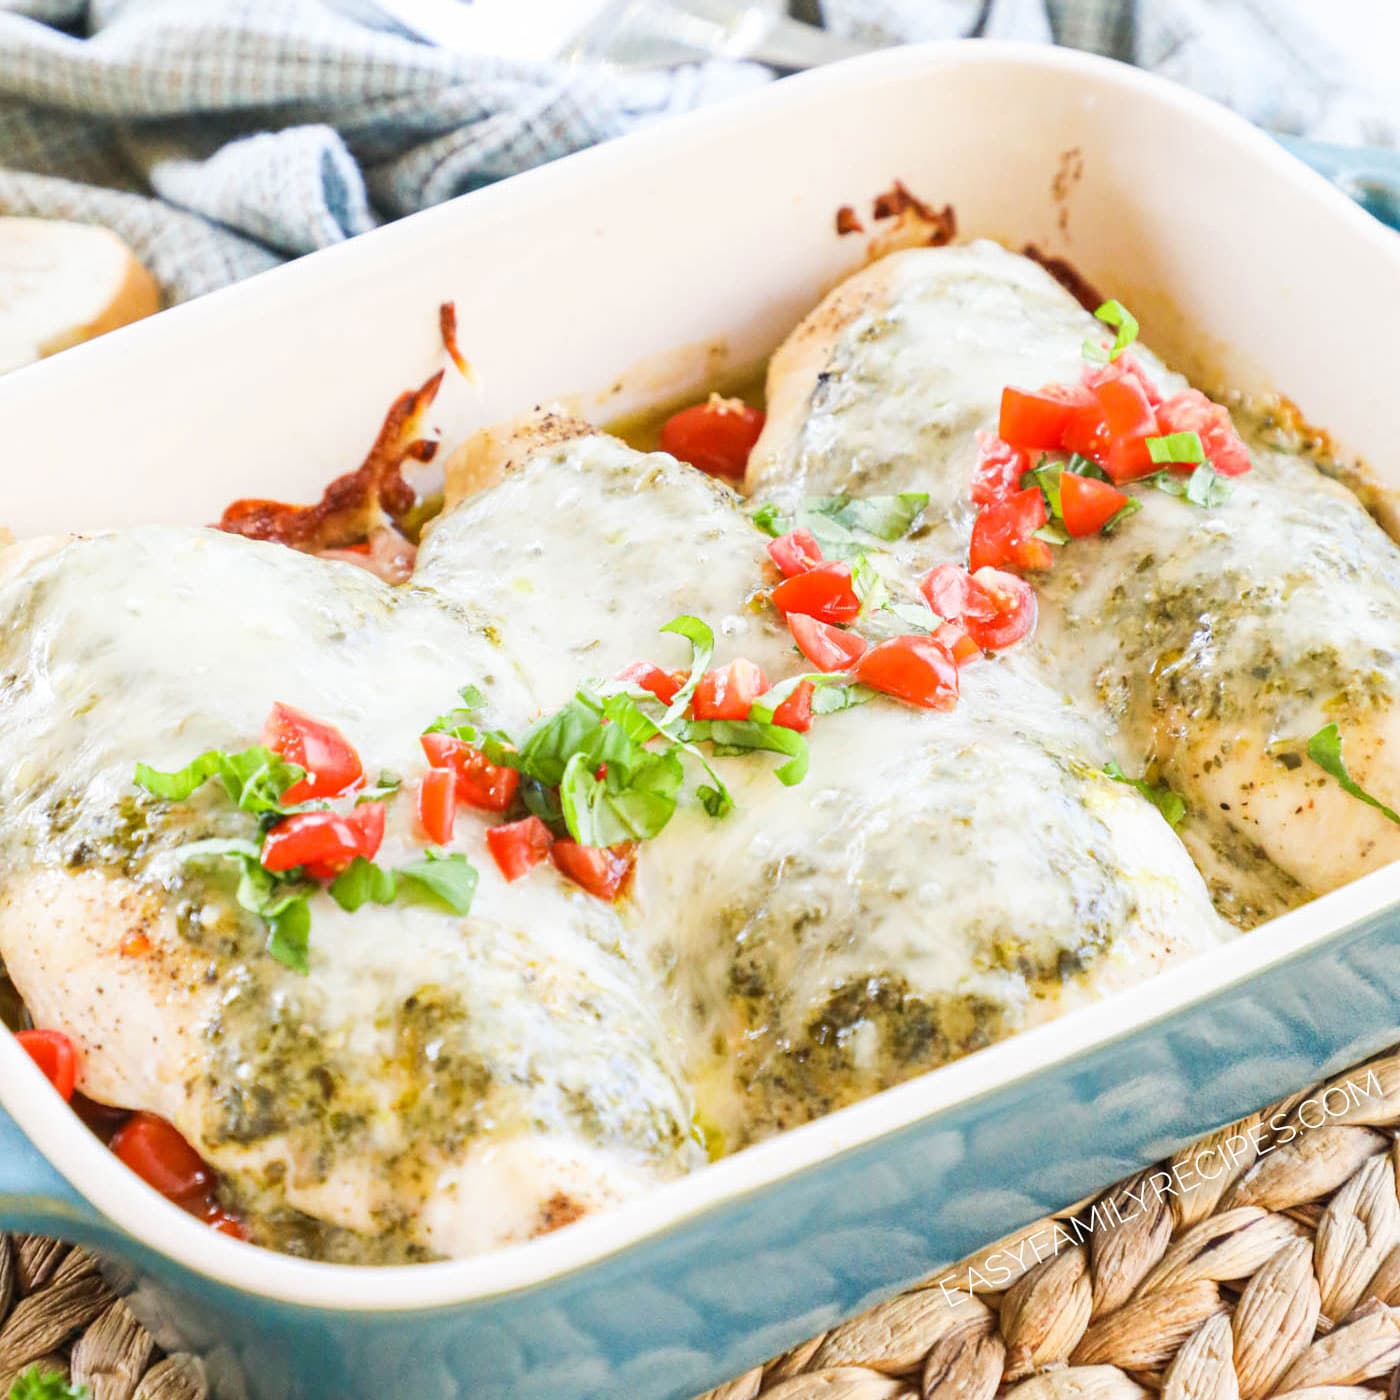 Pesto Chicken Bake with Tomatoes